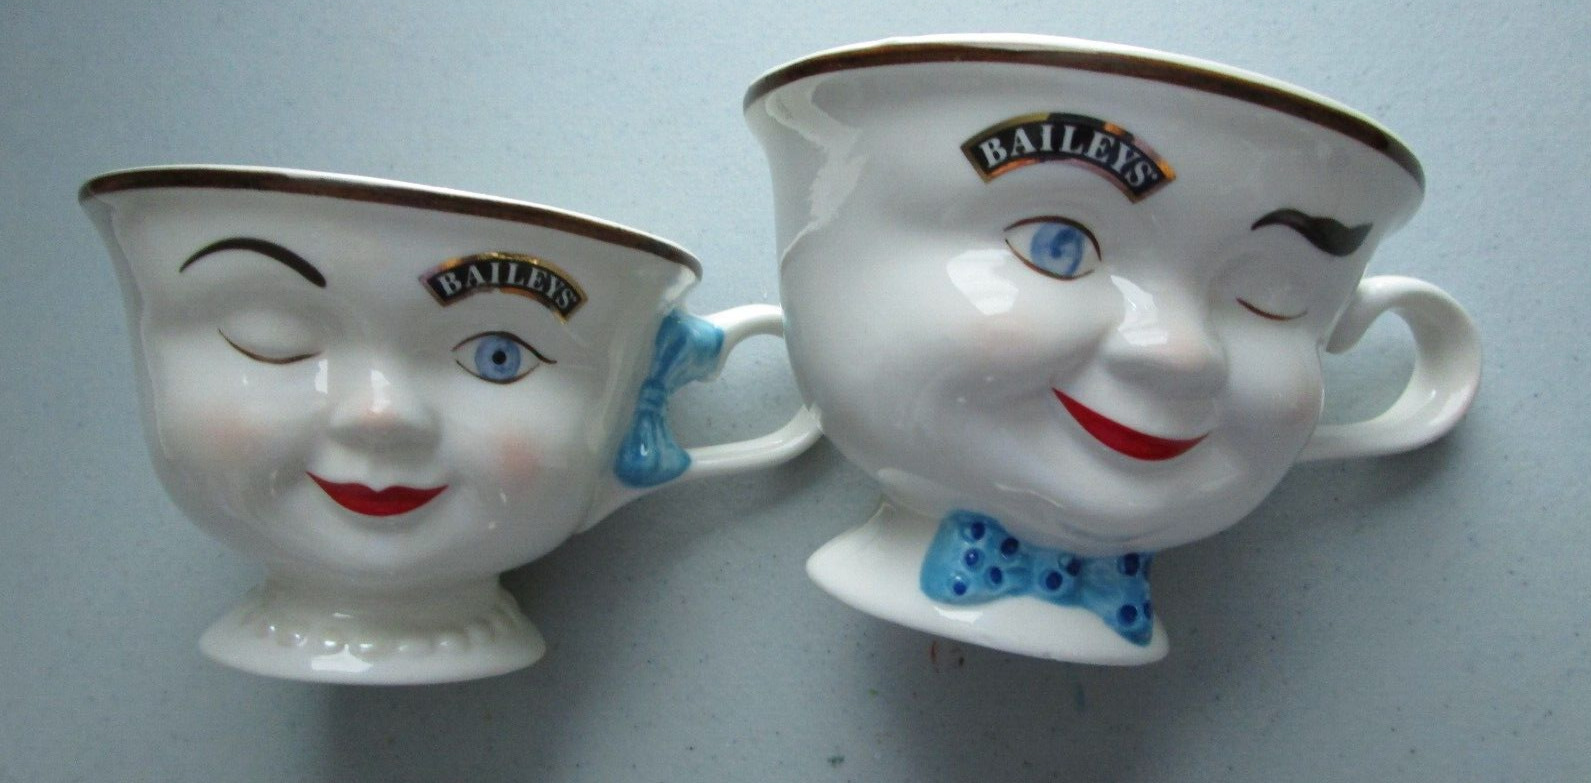 Baileys 2 Pc Coffee Set His and Hers Two Cups Yum Yum 1996 Ltd Edition